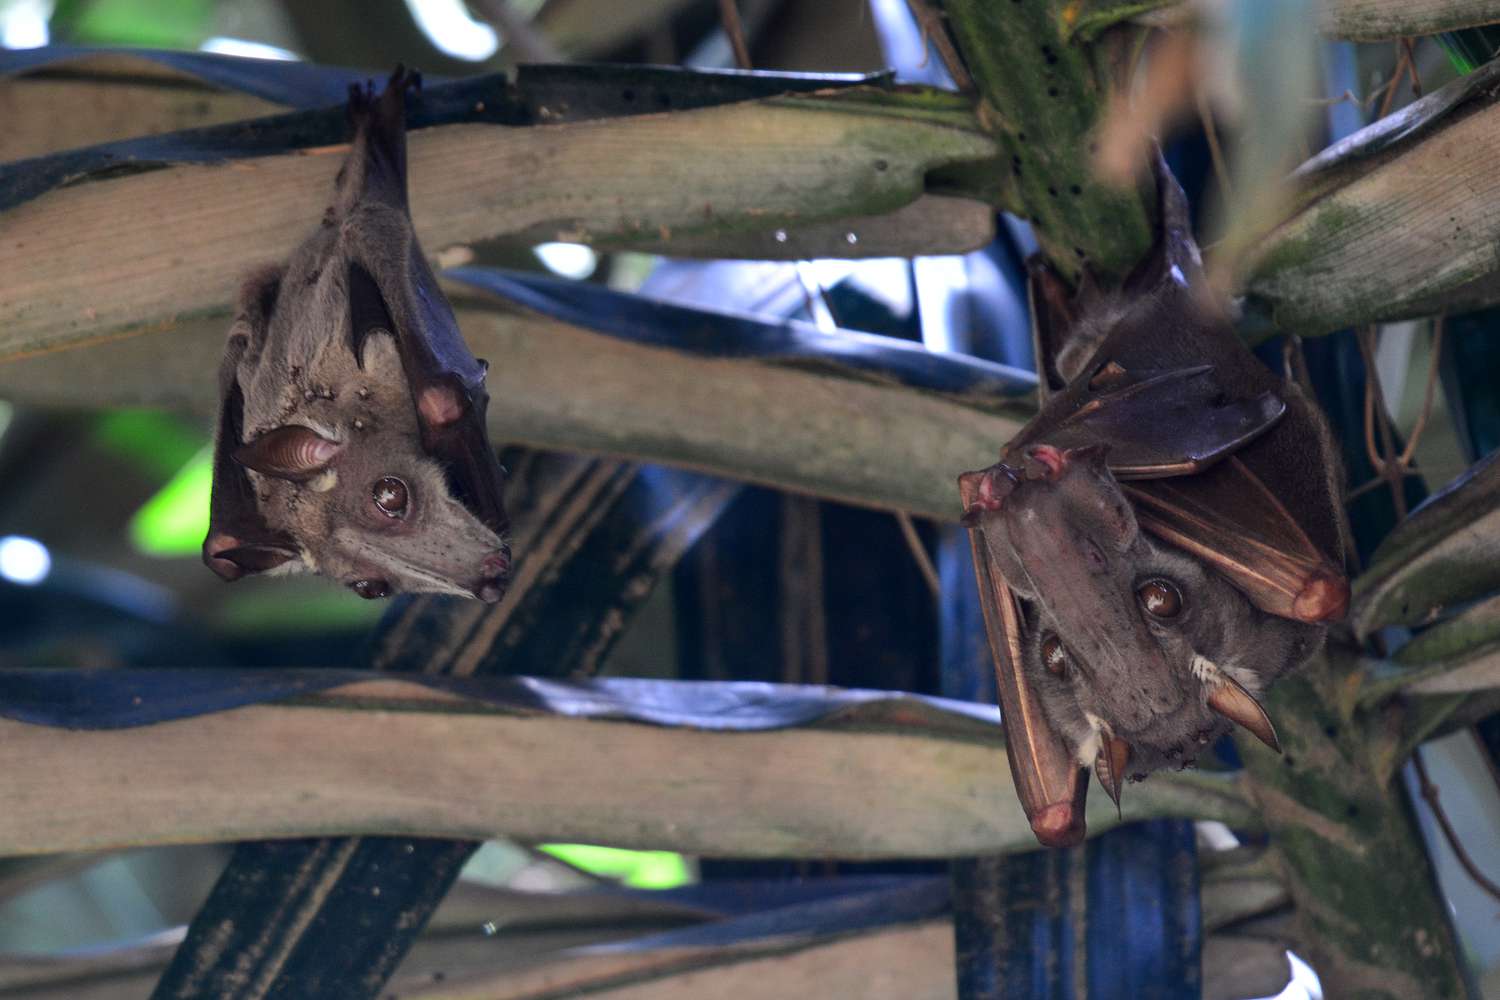 Wahlberg's epauletted fruit bat (Epomophorus wahlbergi) also has a hammer-head face.